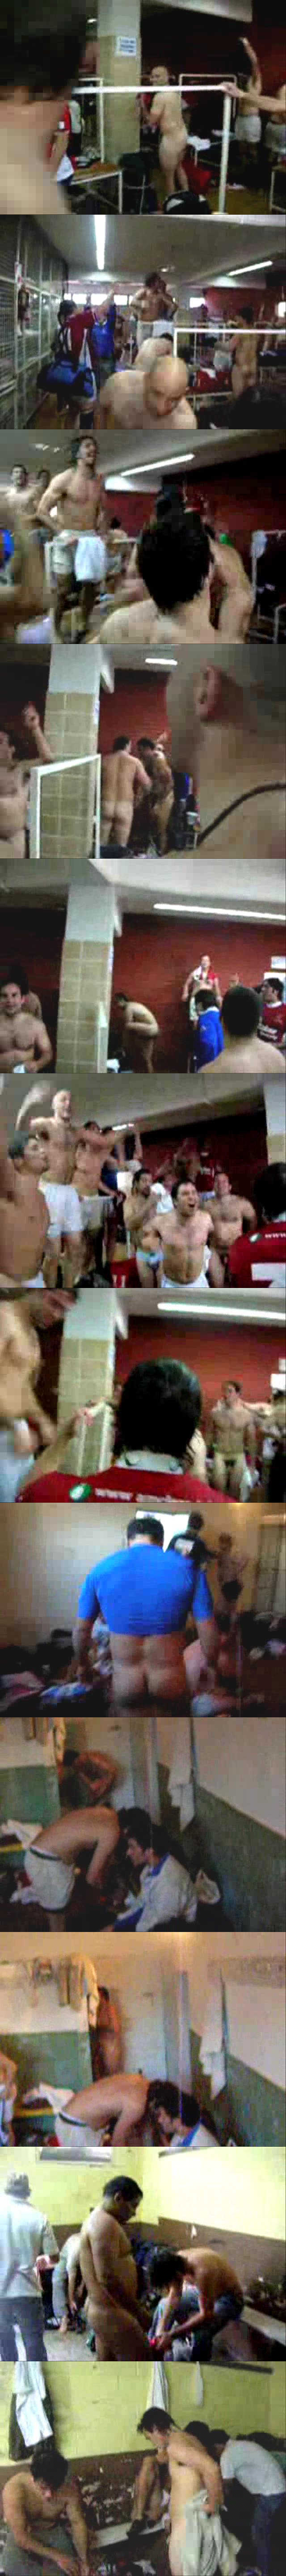 italian rugby players naked in locker room